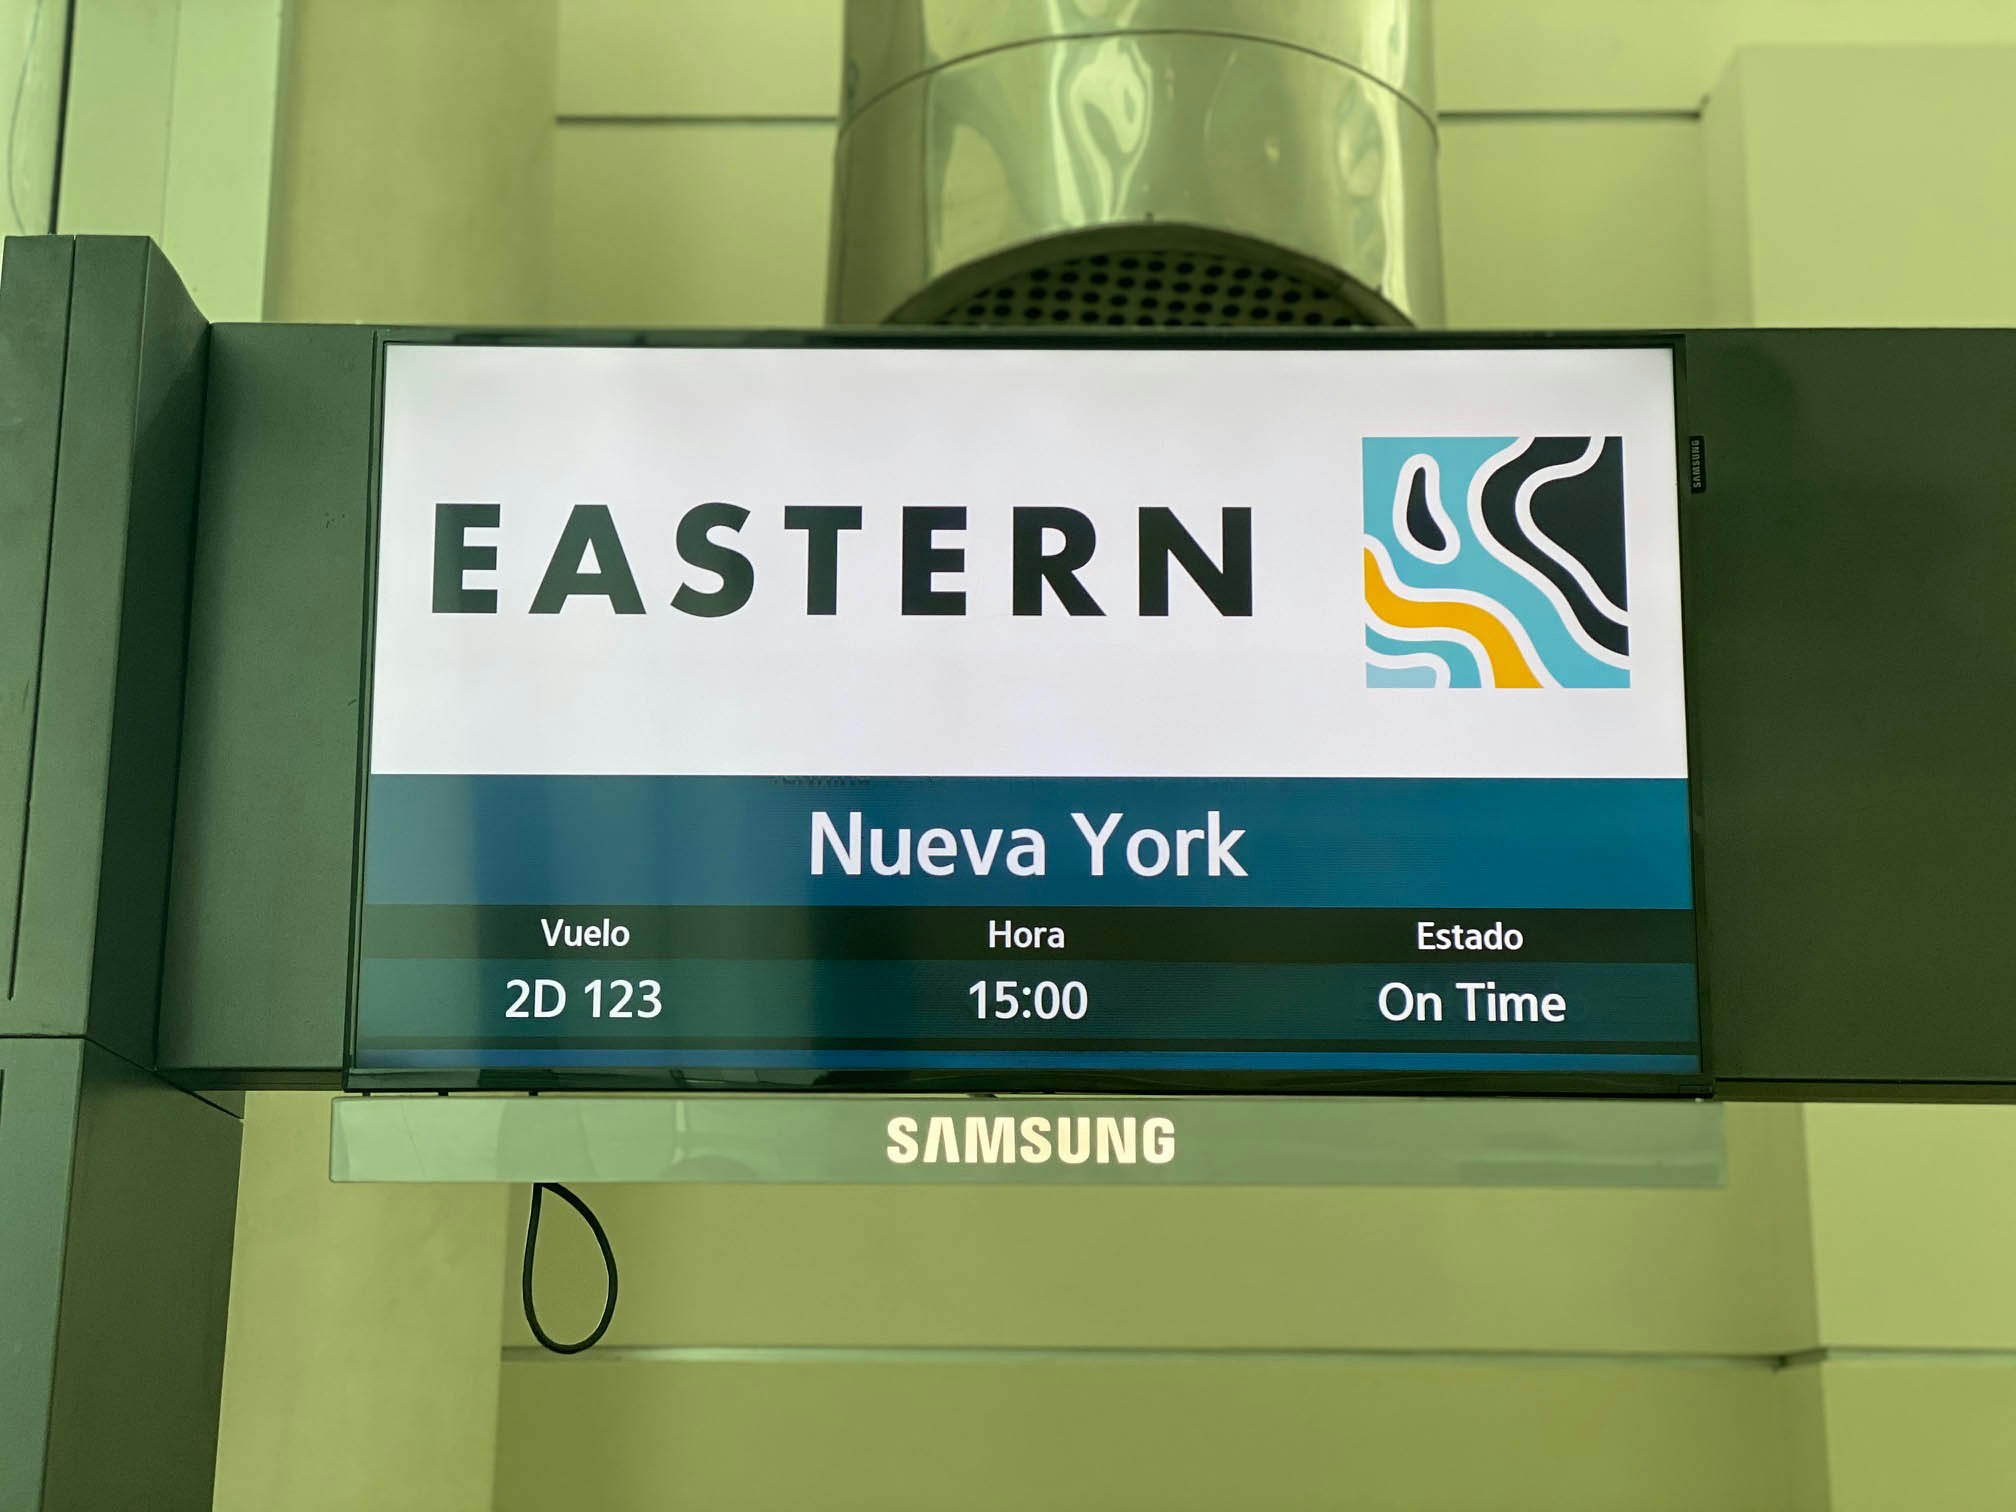 Eastern Airlines makes a return to the skies